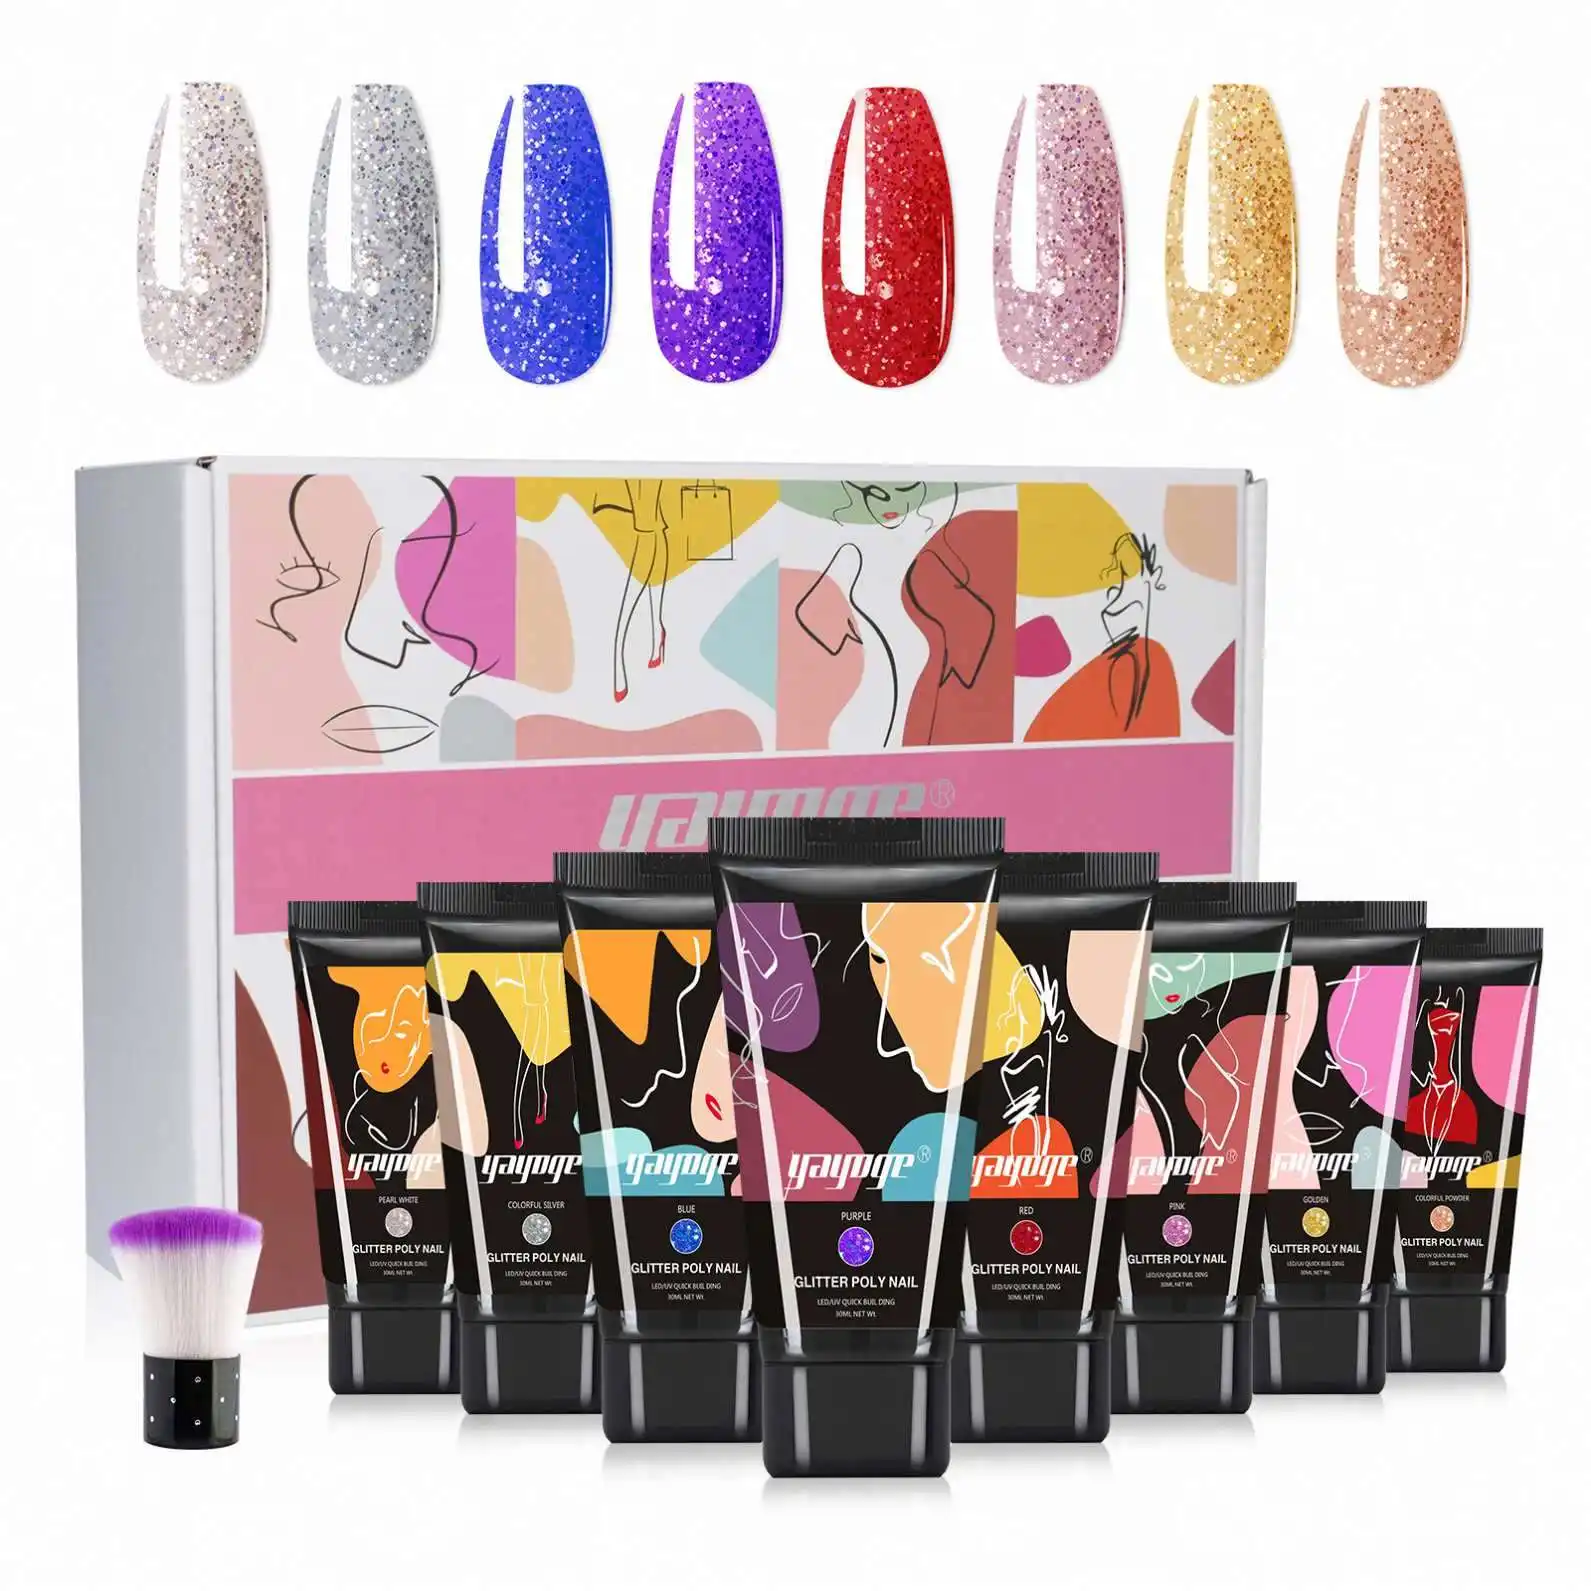 Distributor Wanted Nails Gel Suppliers Base Top Coat Silcare With Uv Nail Polish Starter Kit Gel Light